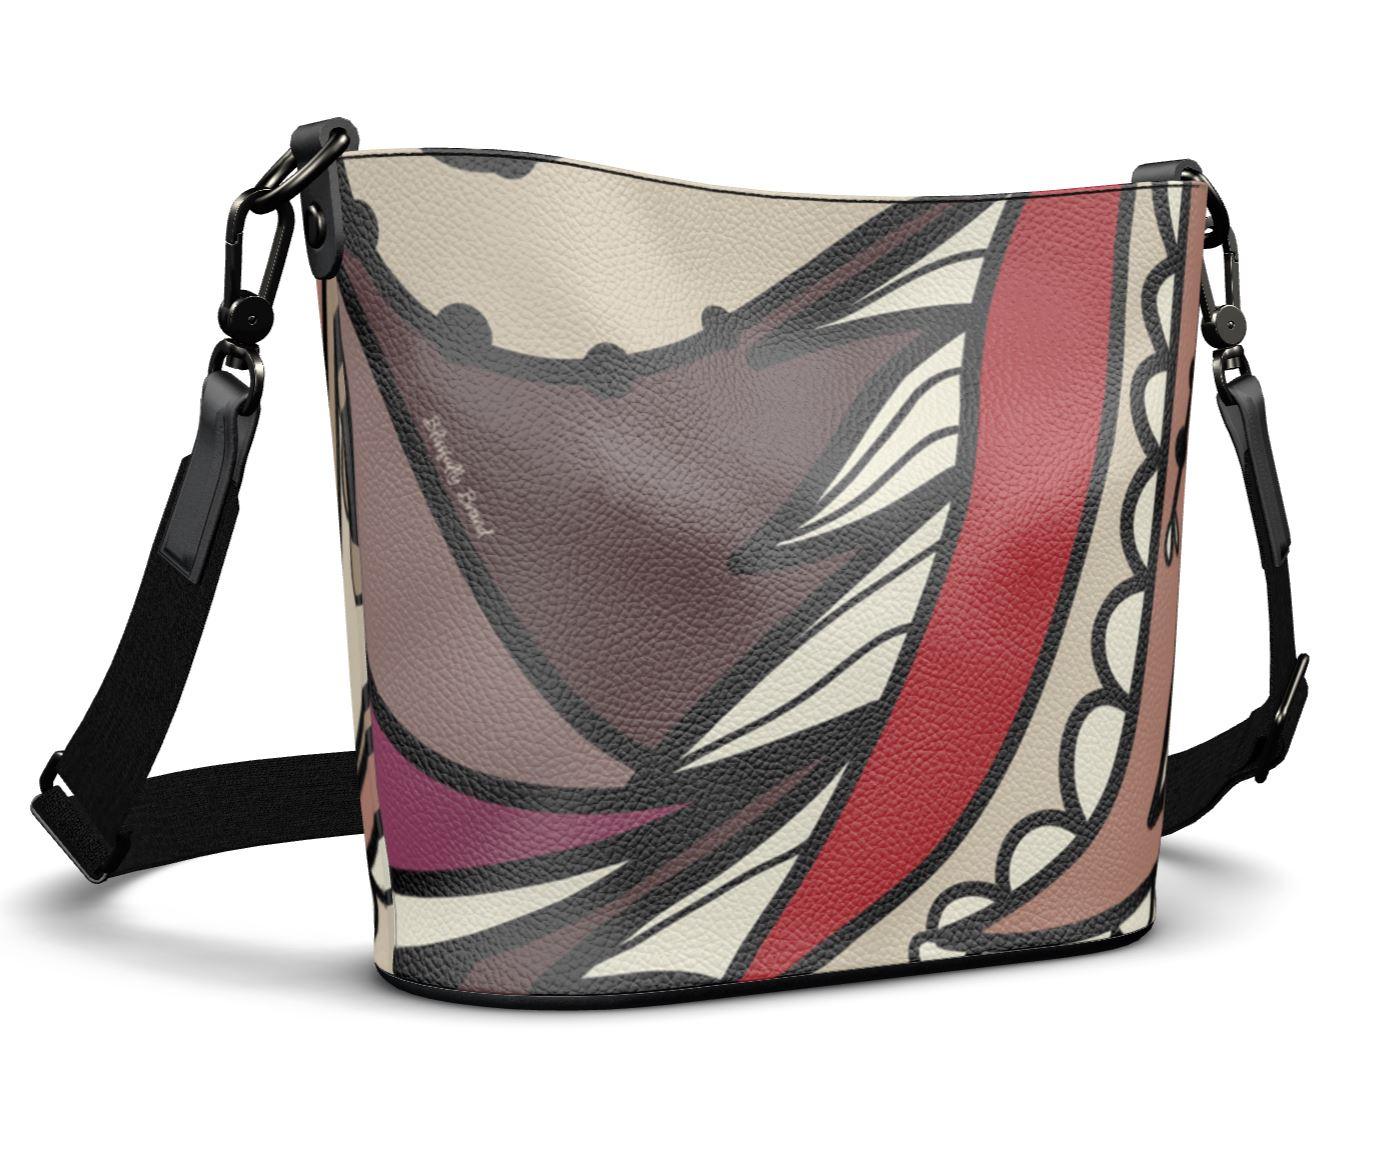 Unia Large Textured  Leather Bucket Tote Bag - Abstract Floral - Blissfully Brand